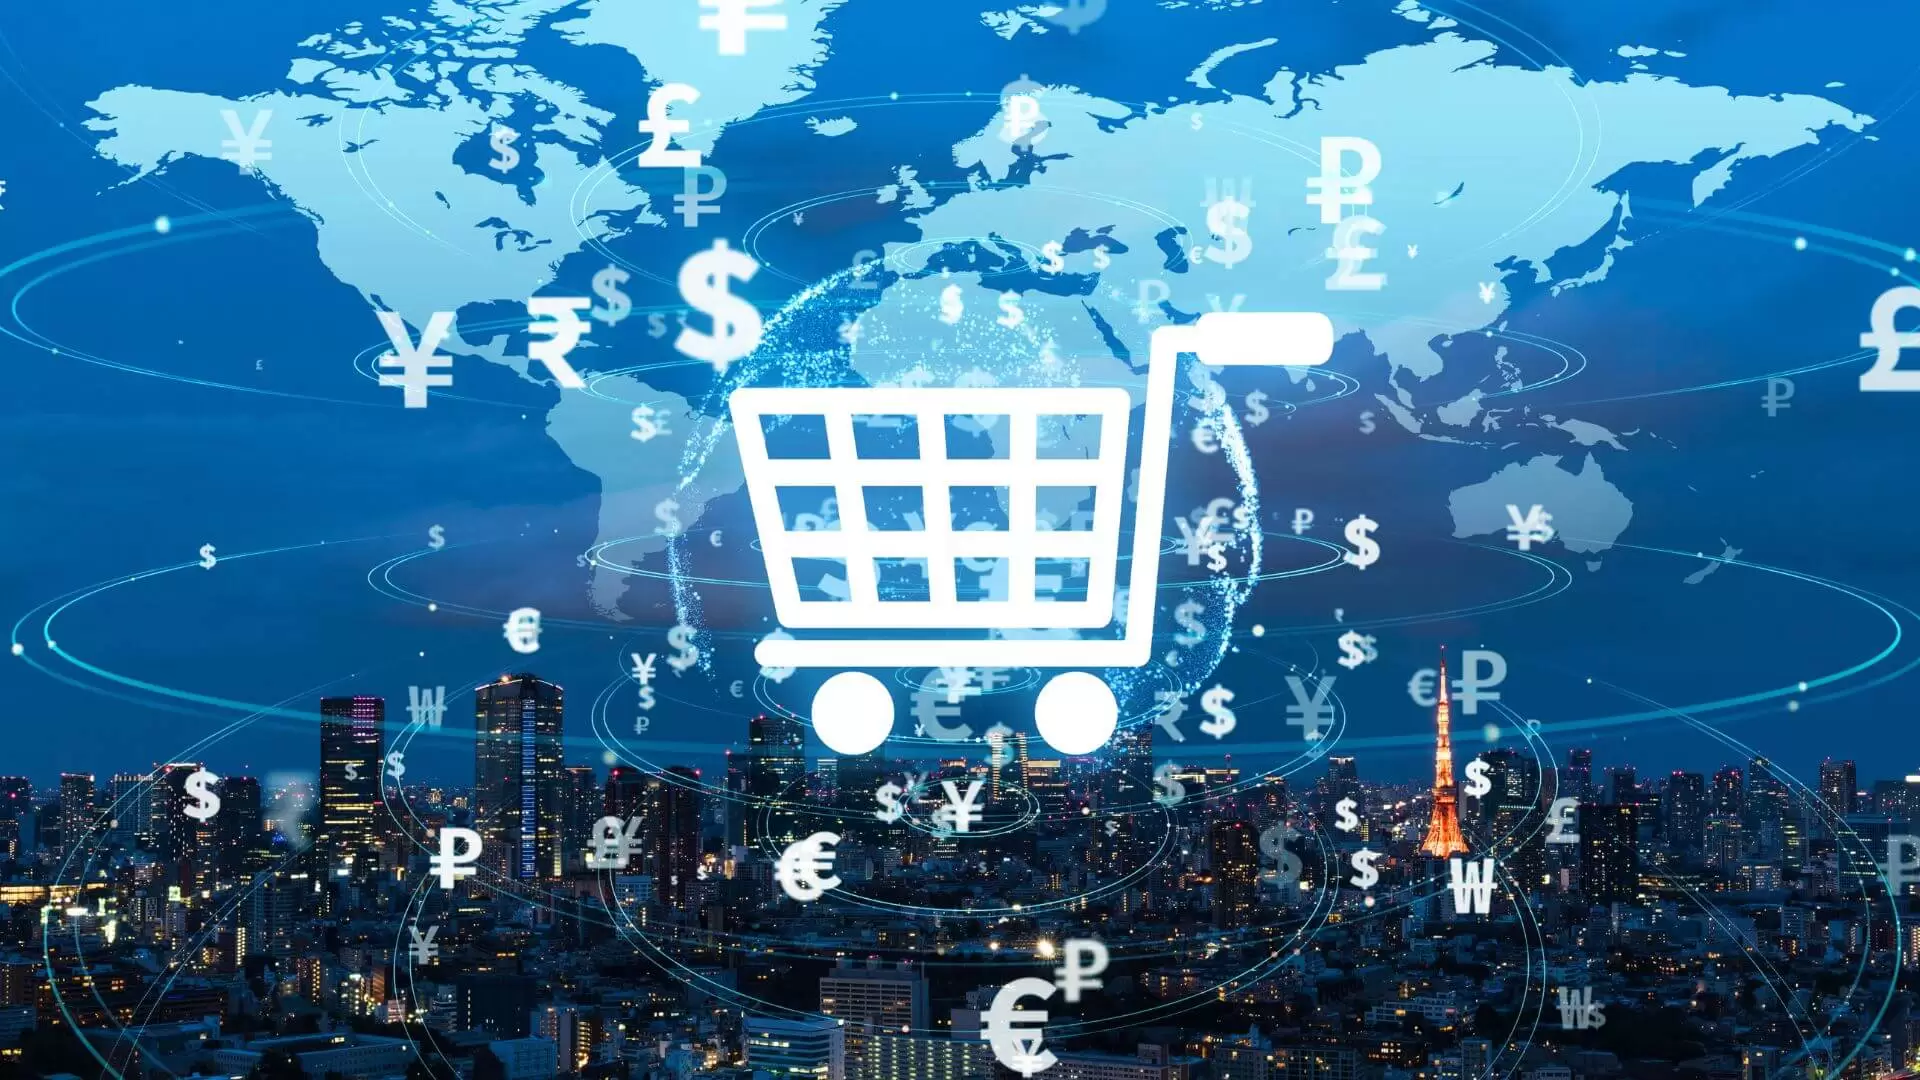 New European Regulations For VAT In eCommerce From 2018 (1)